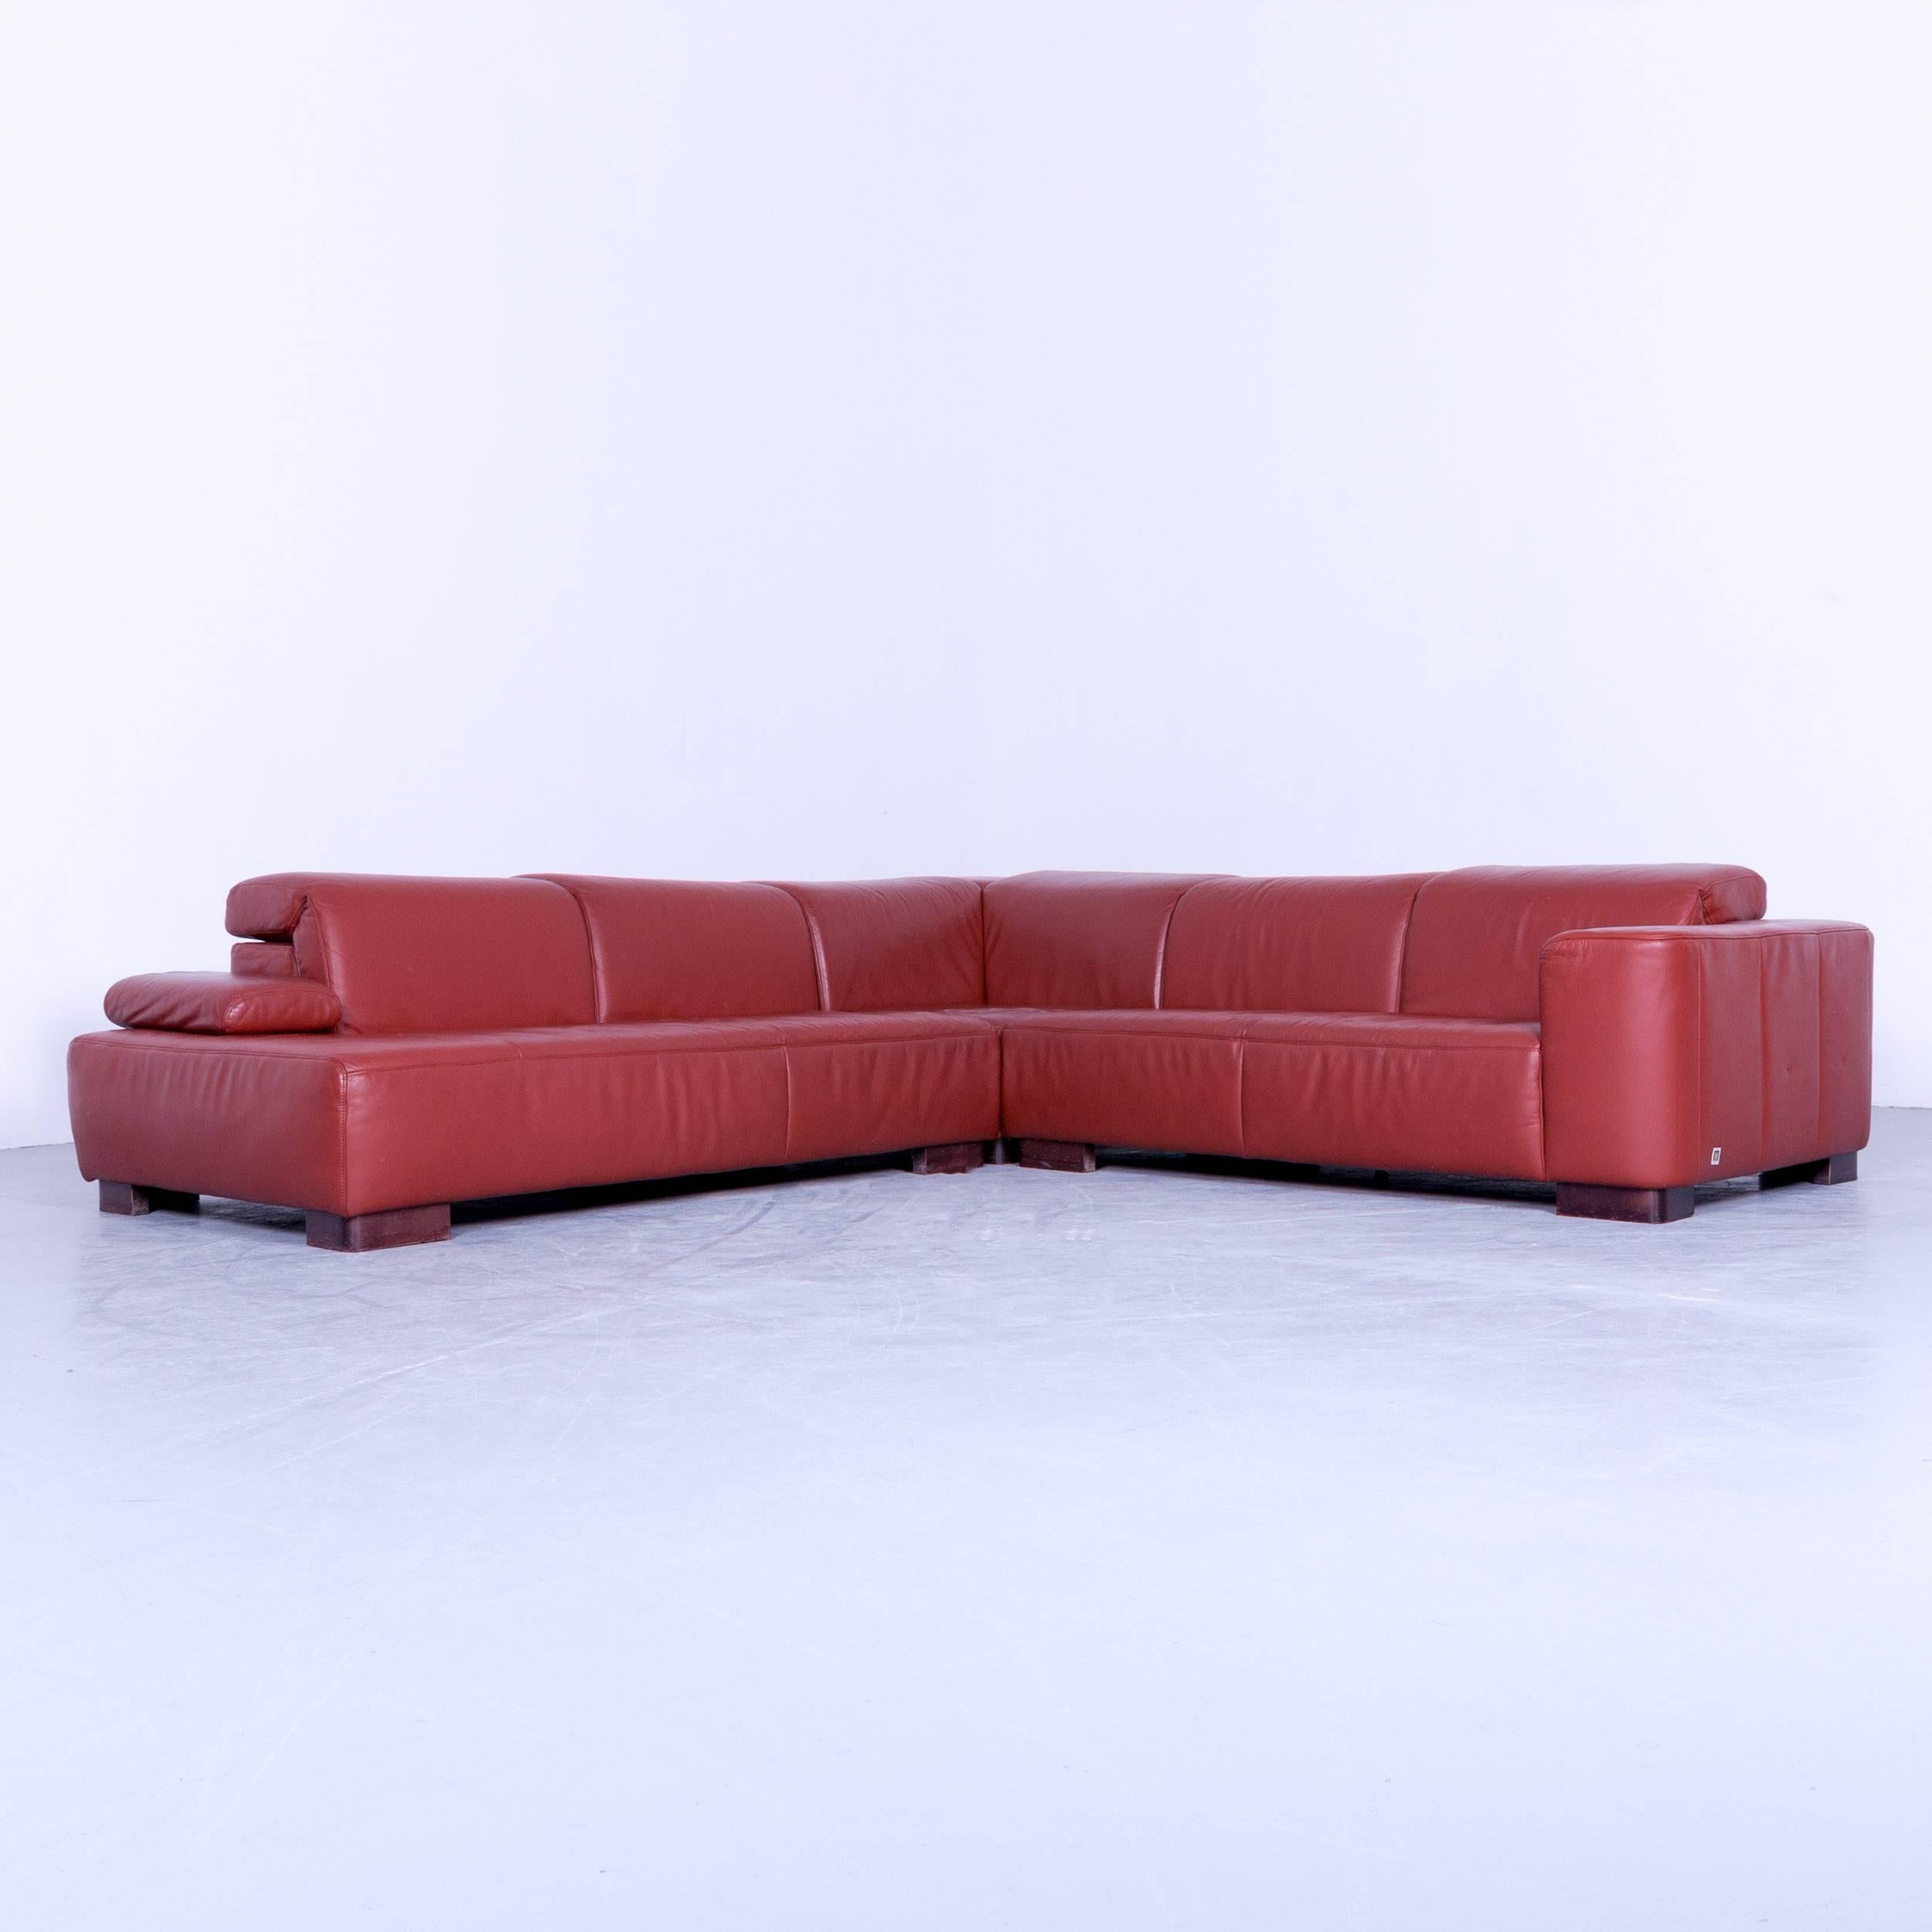 Ewald Schillig designer corner sofa orange red leather function modern wood, in a minimalistic and modern design, with convenient functions, made for pure comfort and flexibility.